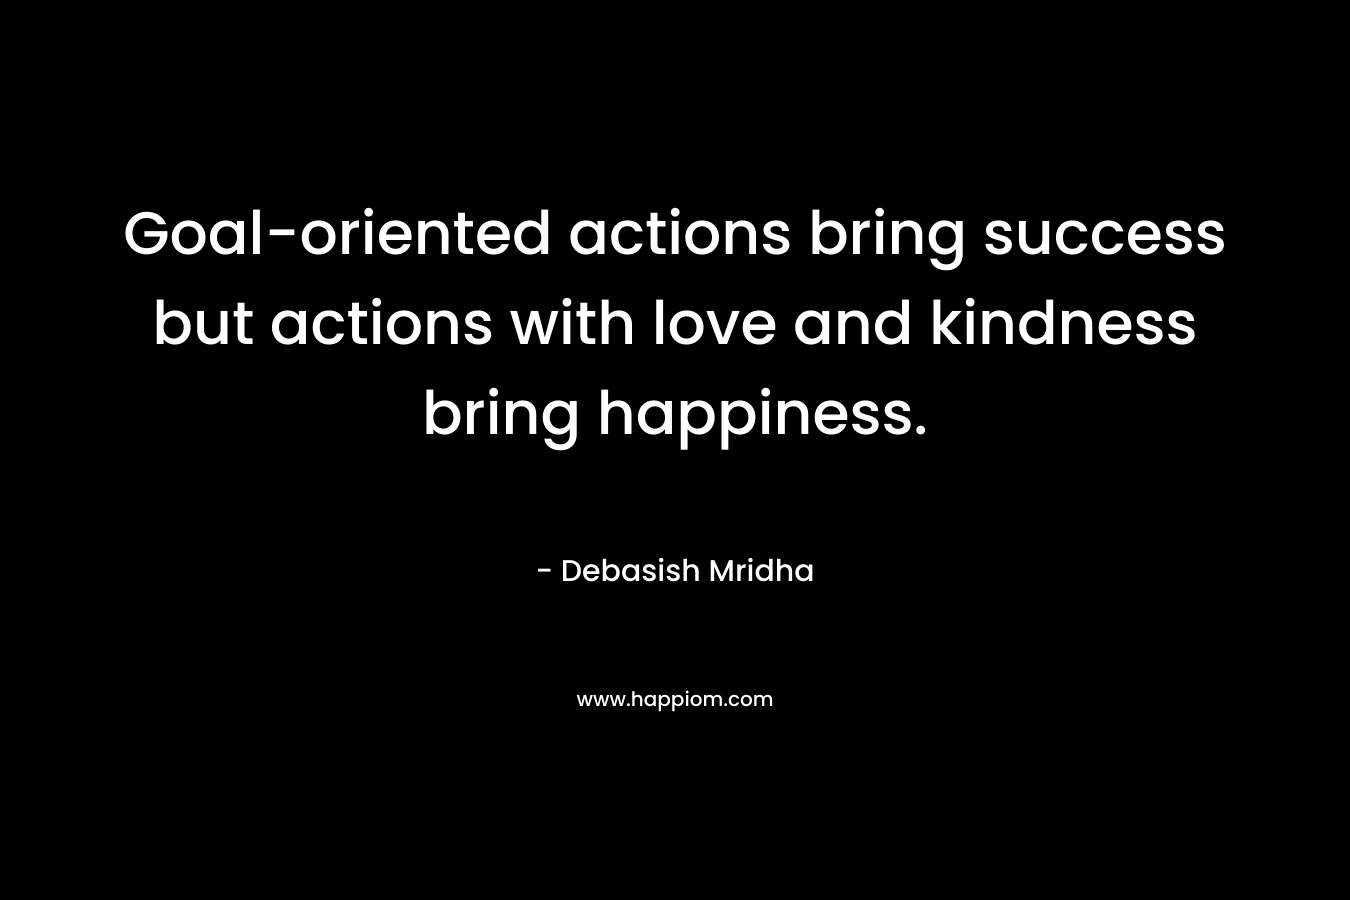 Goal-oriented actions bring success but actions with love and kindness bring happiness. – Debasish Mridha